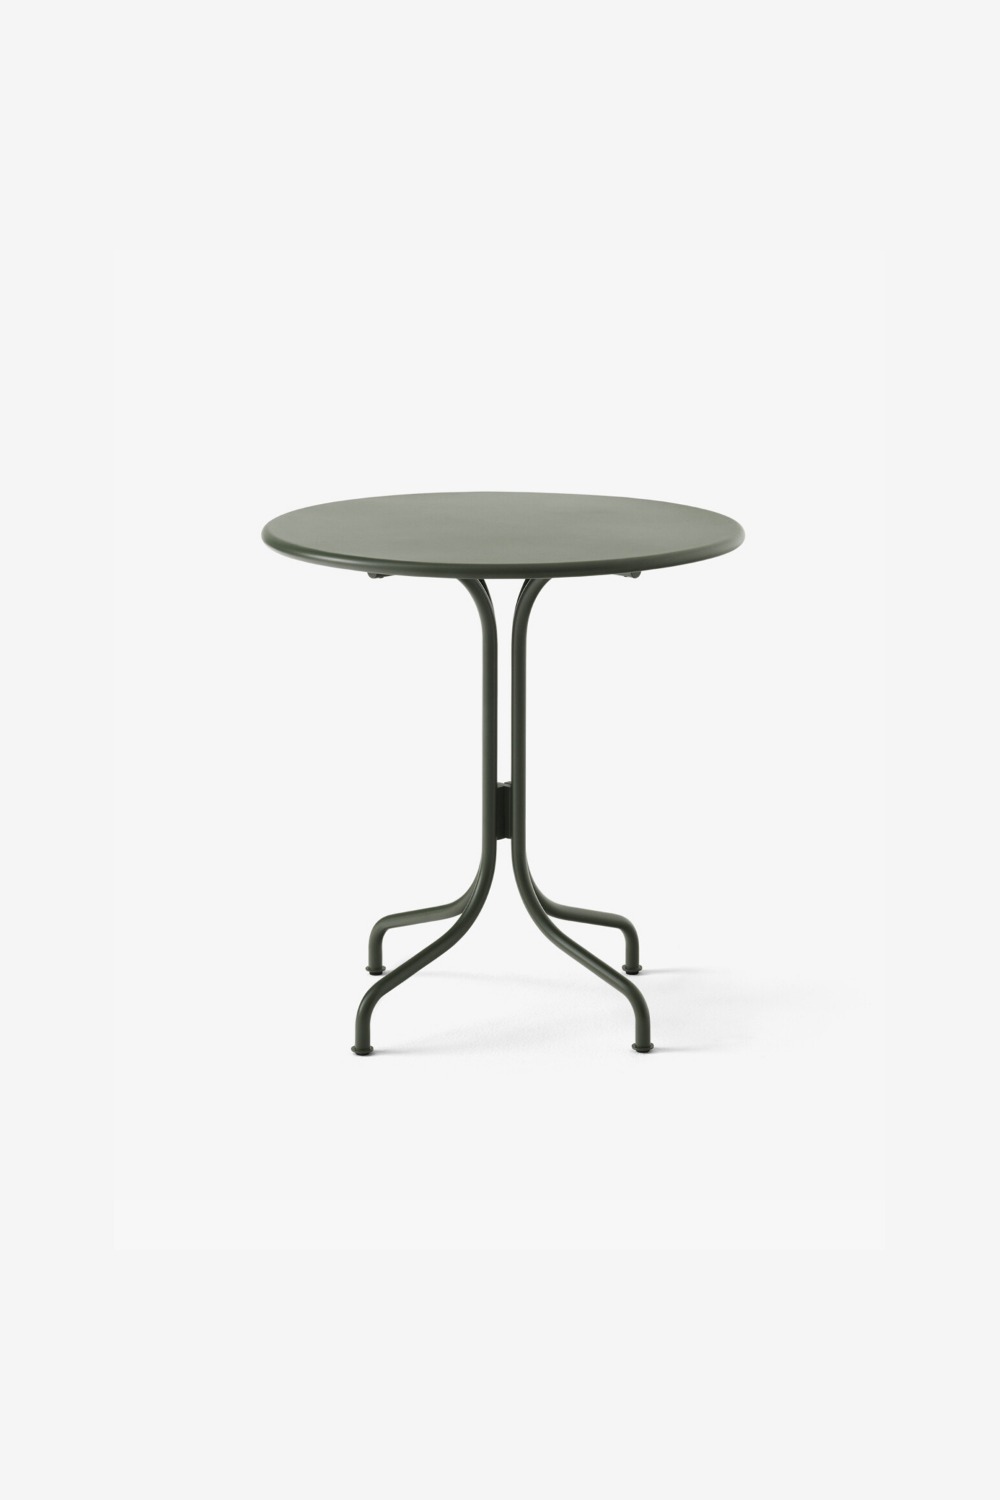 [&amp;Tradition] Thorvald Cafe Table /SC96 (Bronze Green)